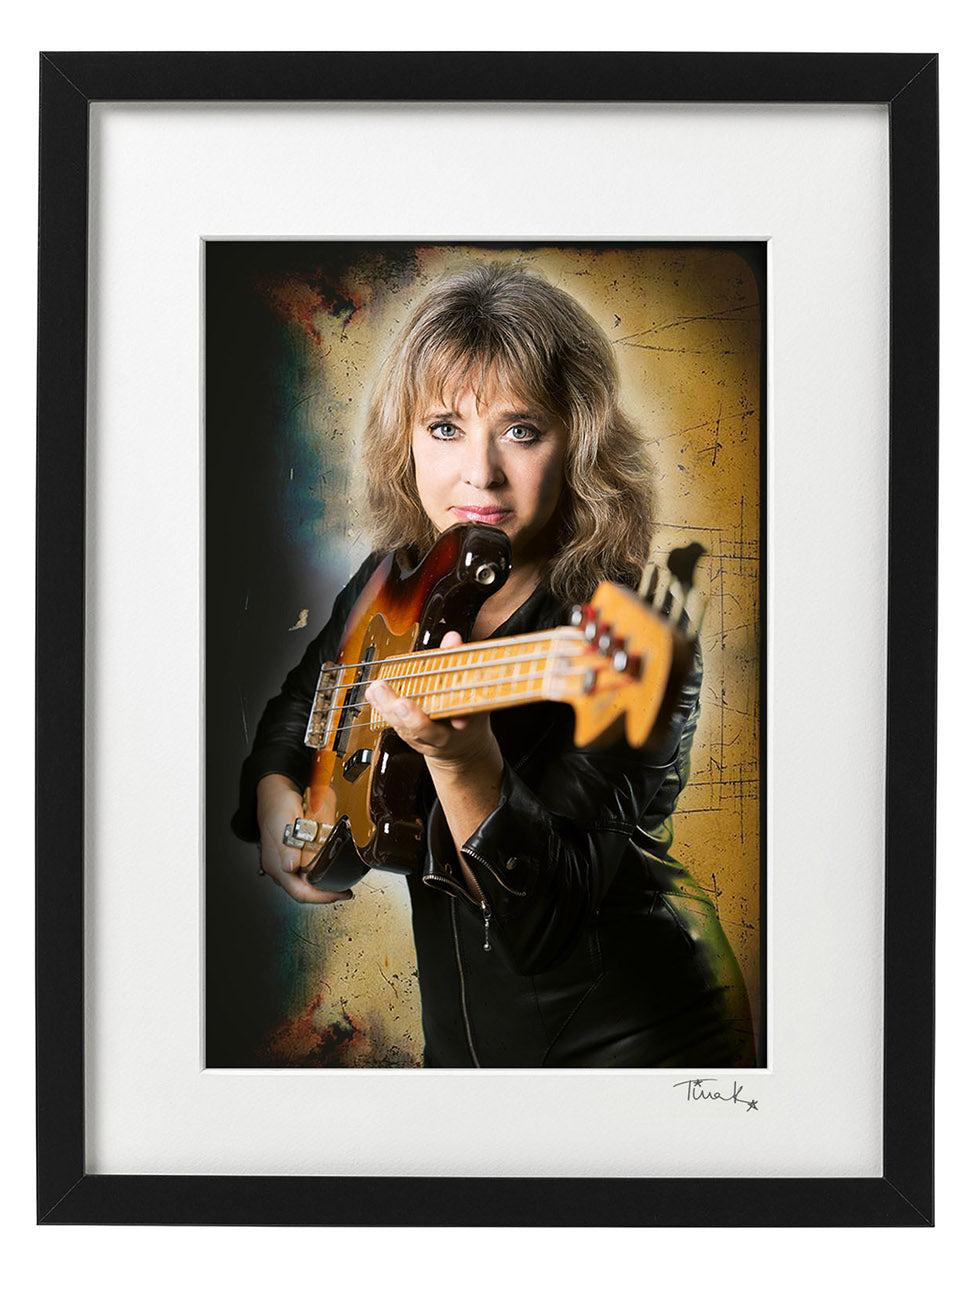 Poster print of rock singer and bassist Suzi Quatro in her leather jumpsuit or Tuscadero at her home in Essex in 2014.